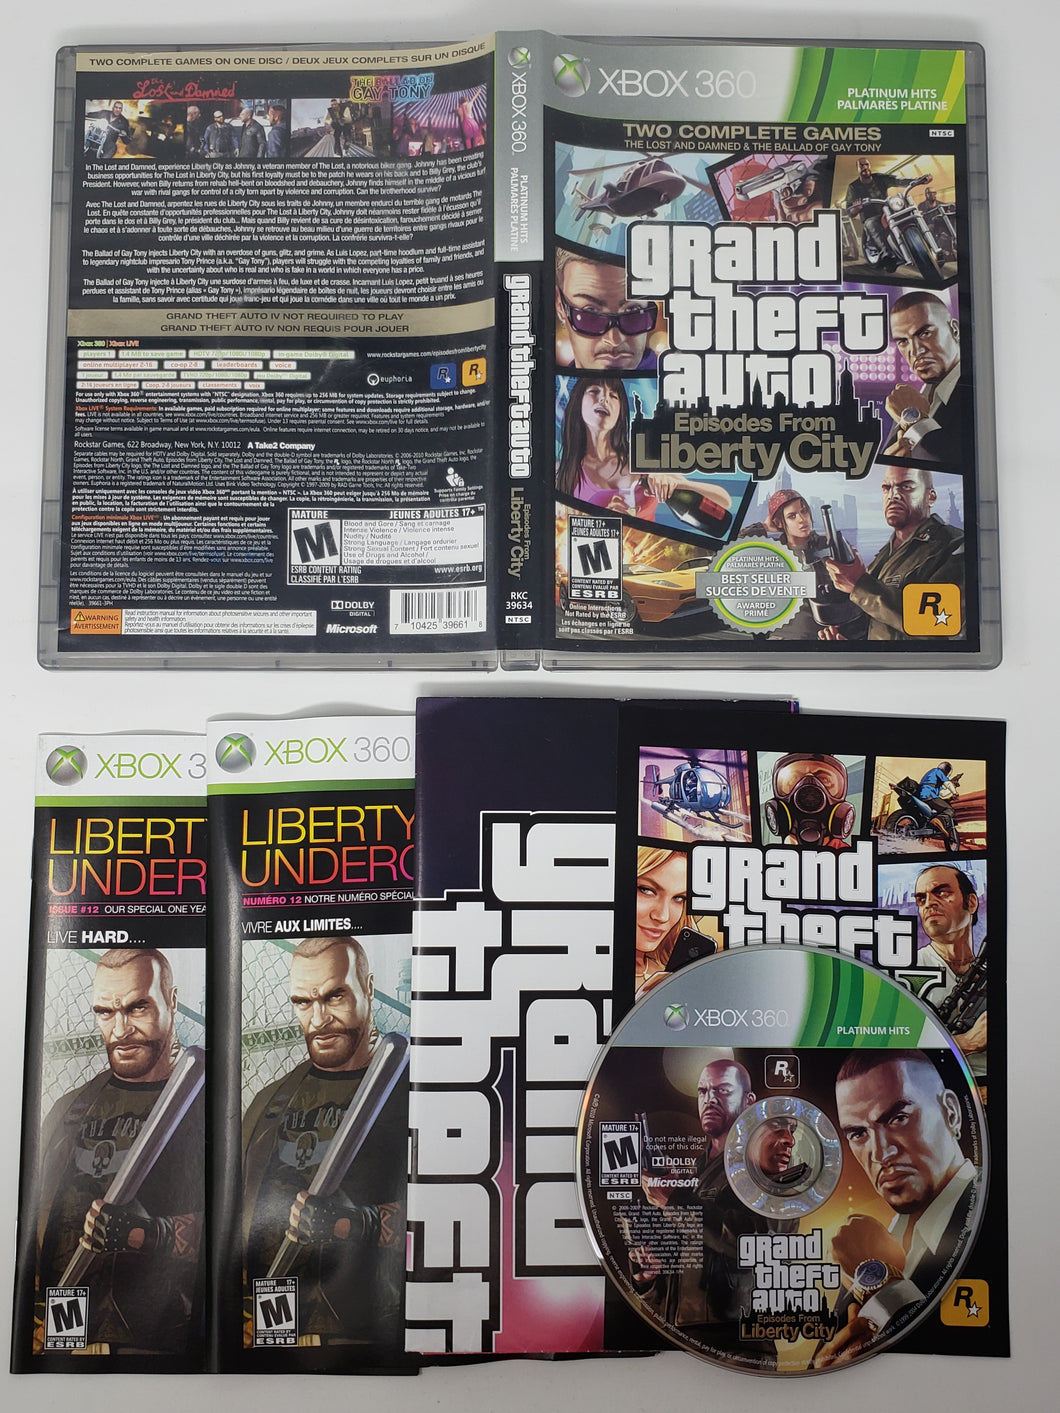 Grand Theft Auto - Episodes from Liberty City [Platinum Hits] - Microsoft Xbox 360